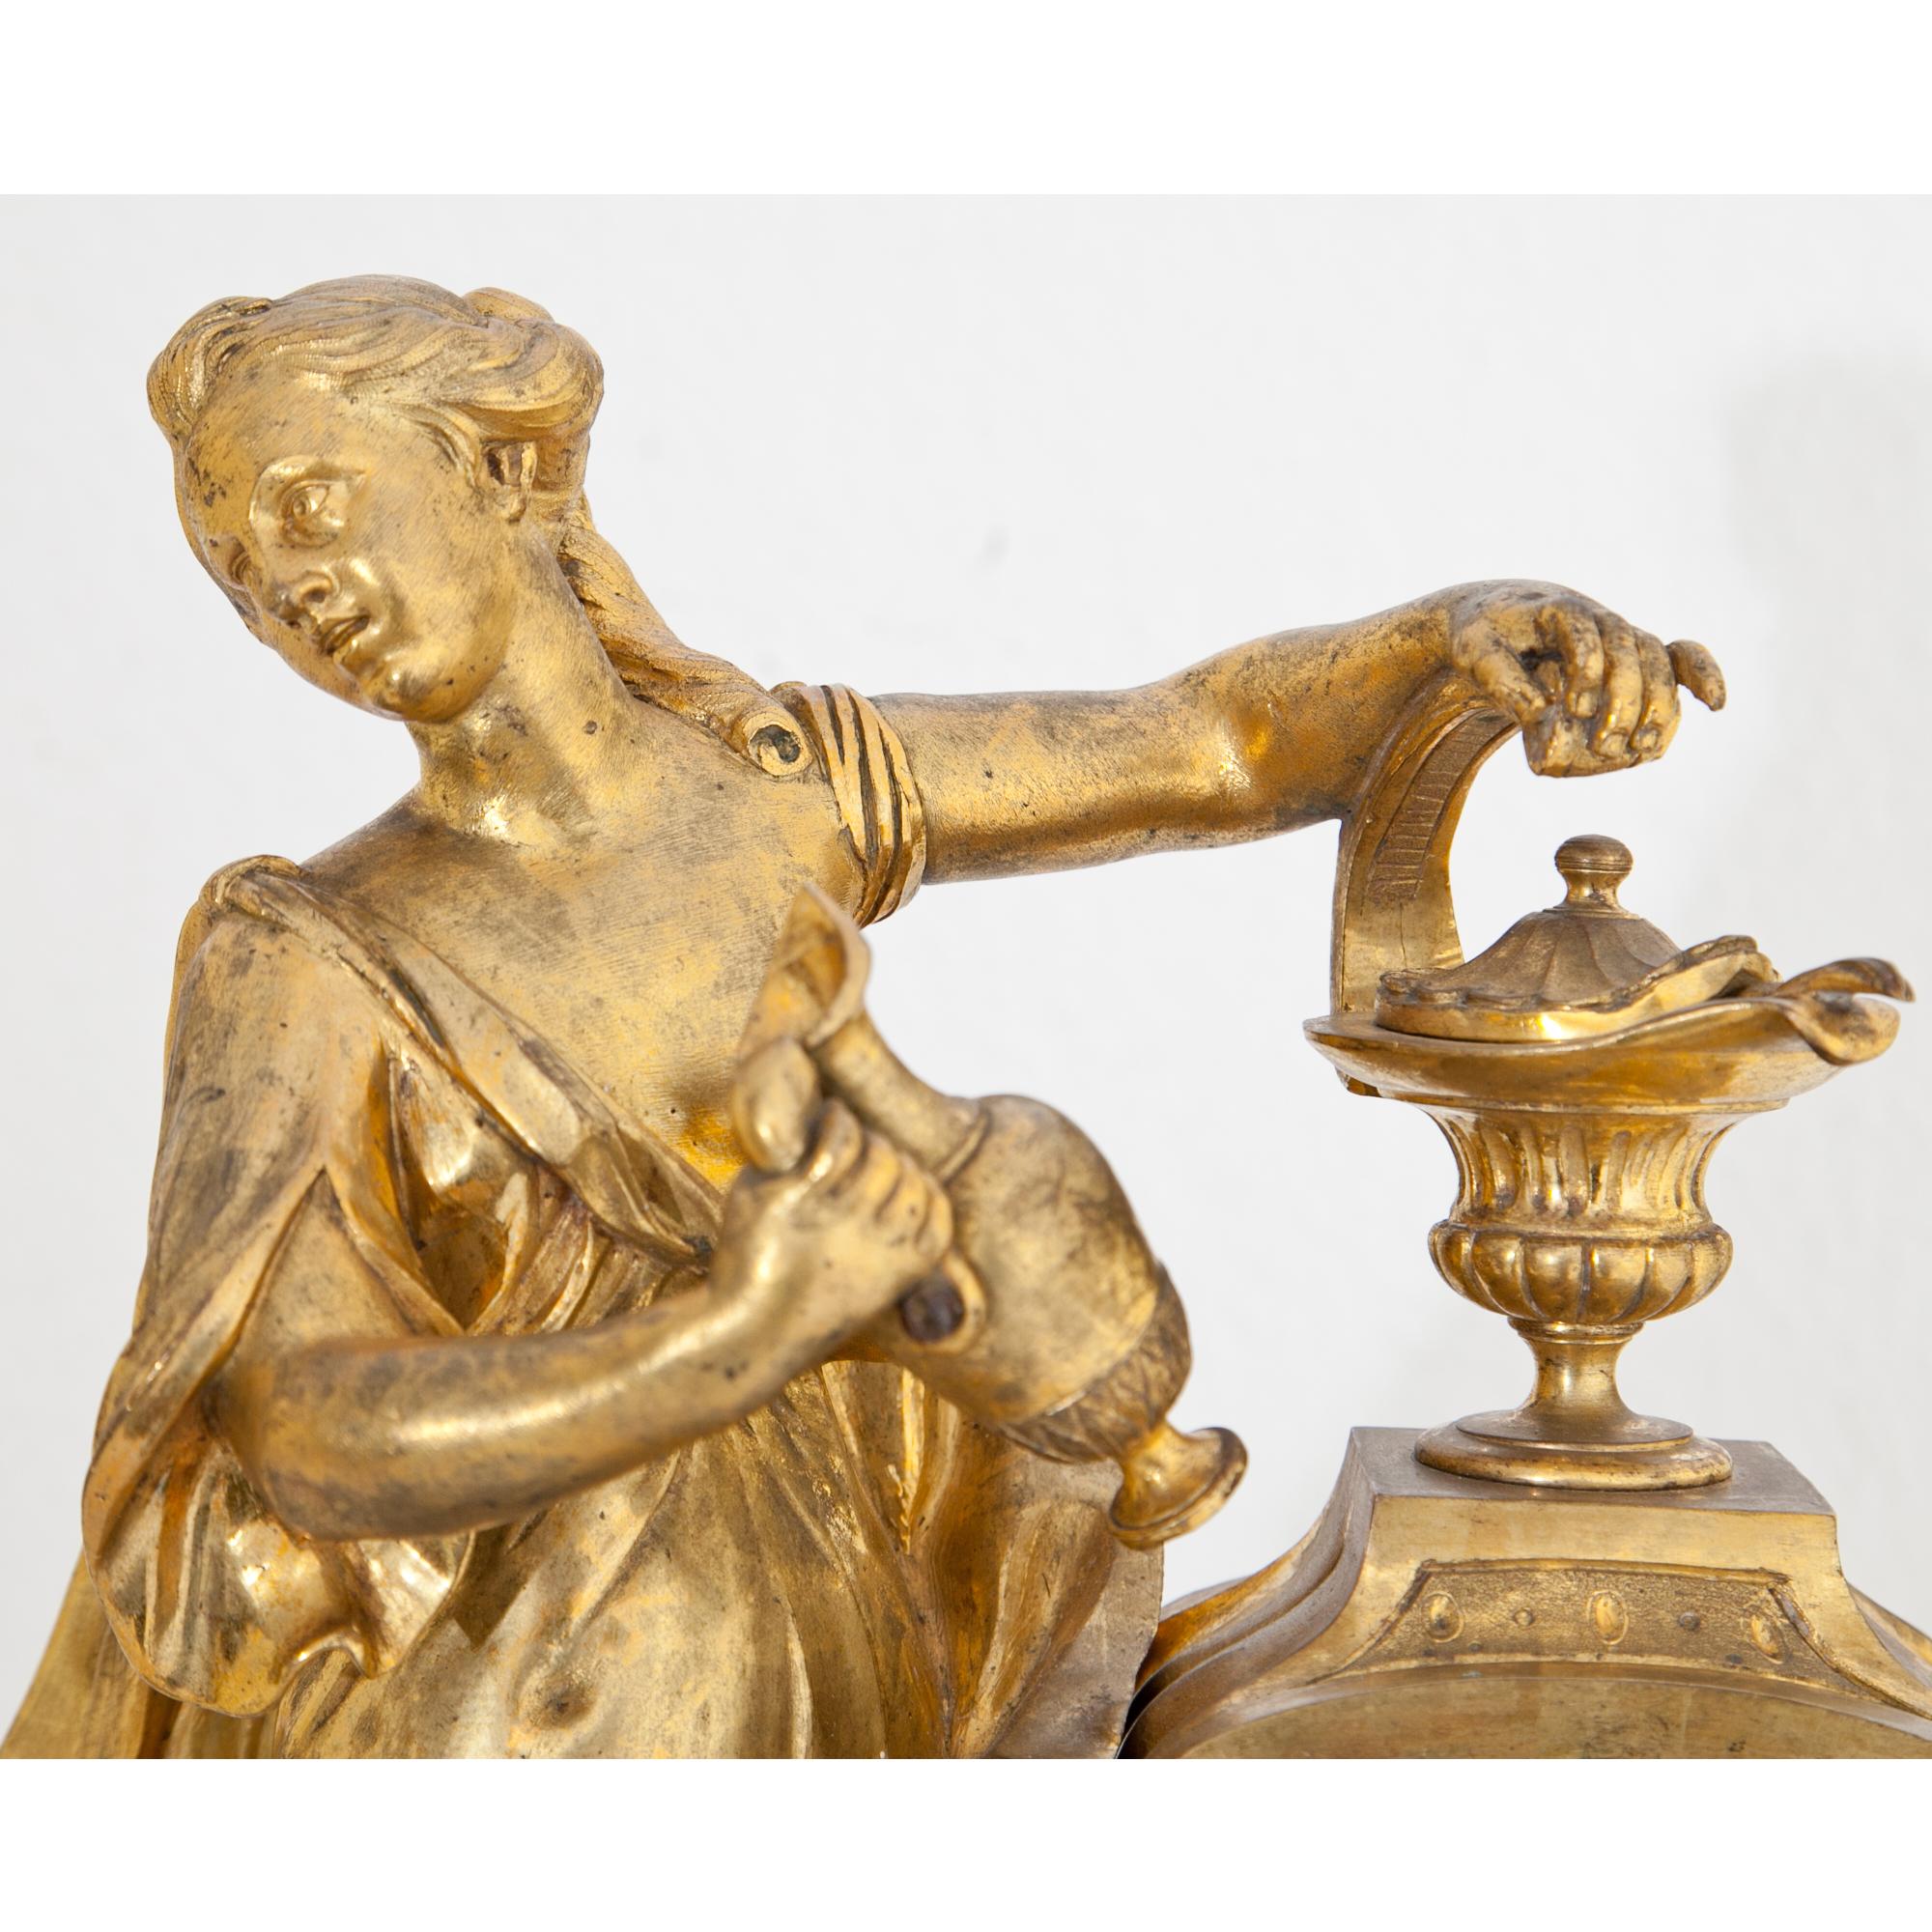 French Louis Seize Pendule clock on a white marble base above cone feet. The figurative depiction shows Psyche while filling the oil lamp, before she comes at night to her lover Amor. Inscribed on the enamel clockface ‘Cronier à Pars’. The clockwork